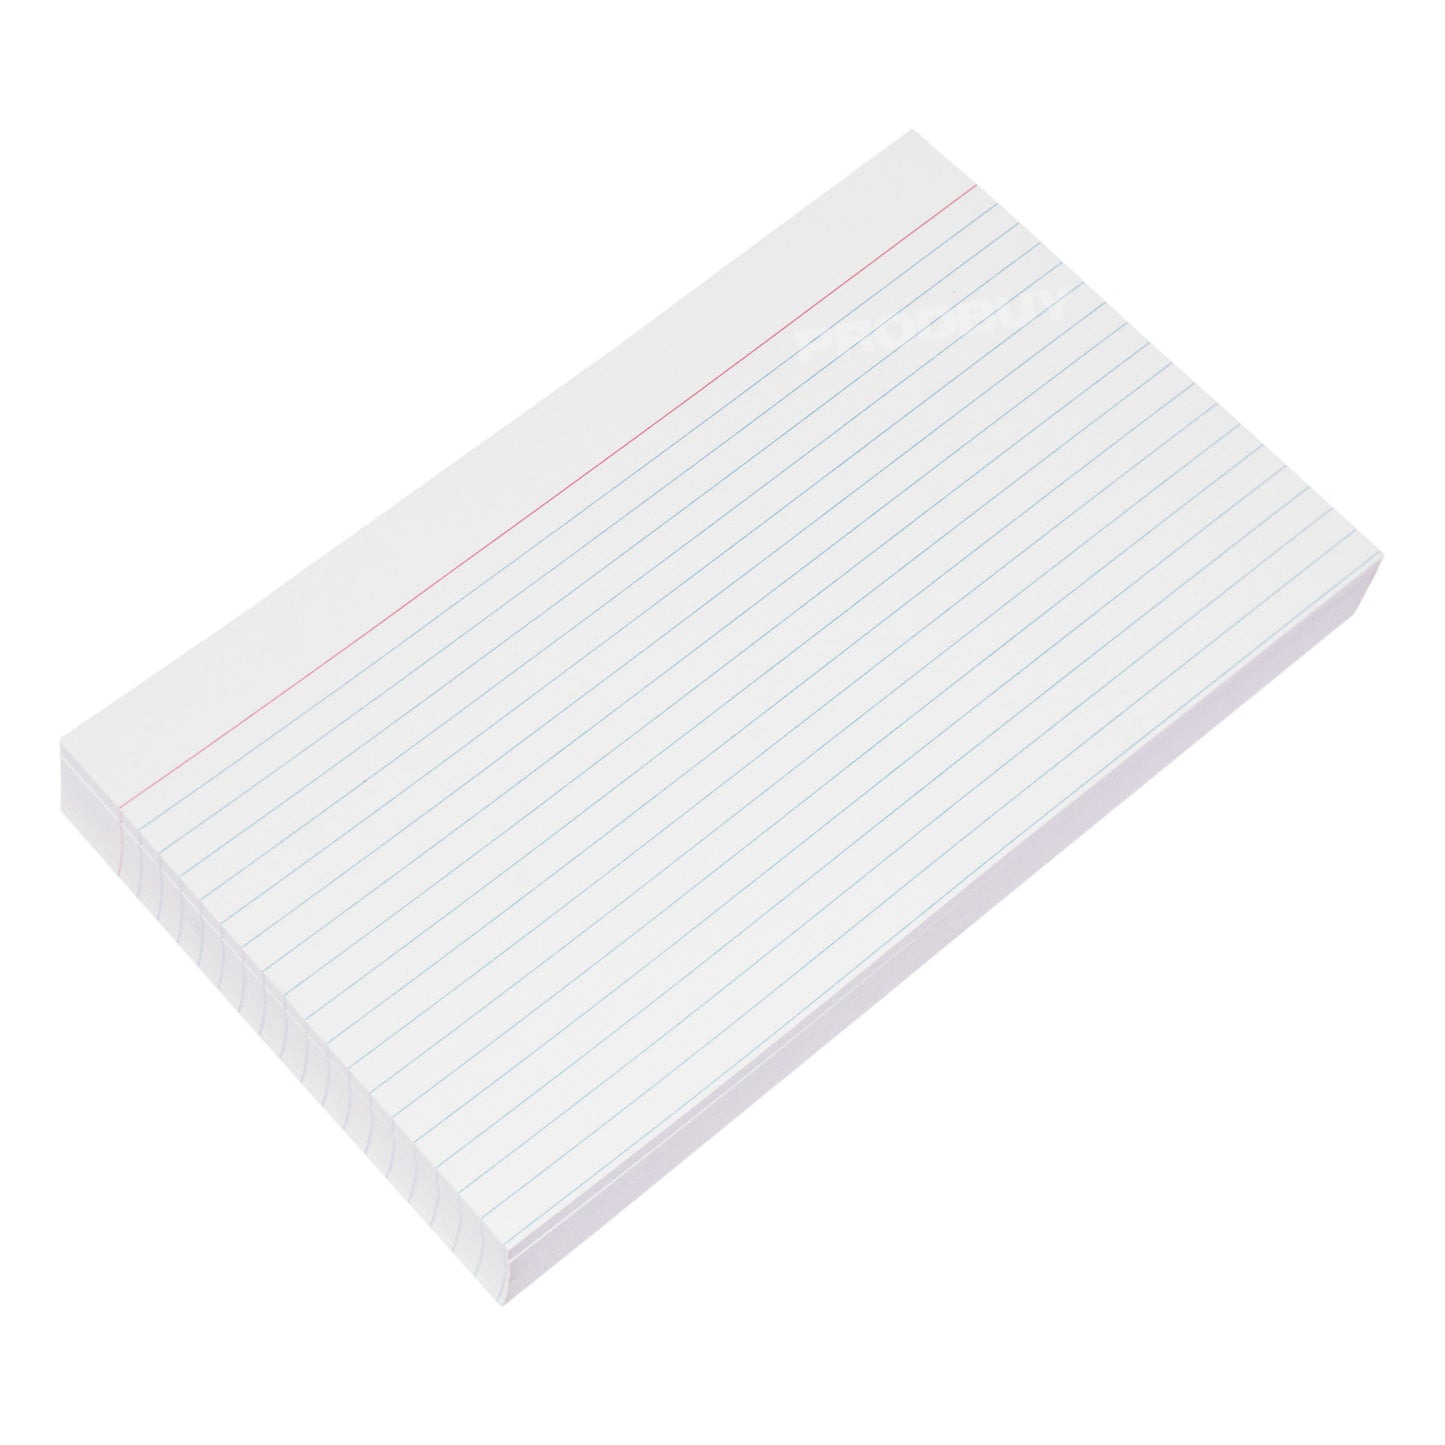 Pack of 100 Record Index Cards 8" x 5" Lined White Revision Sheets